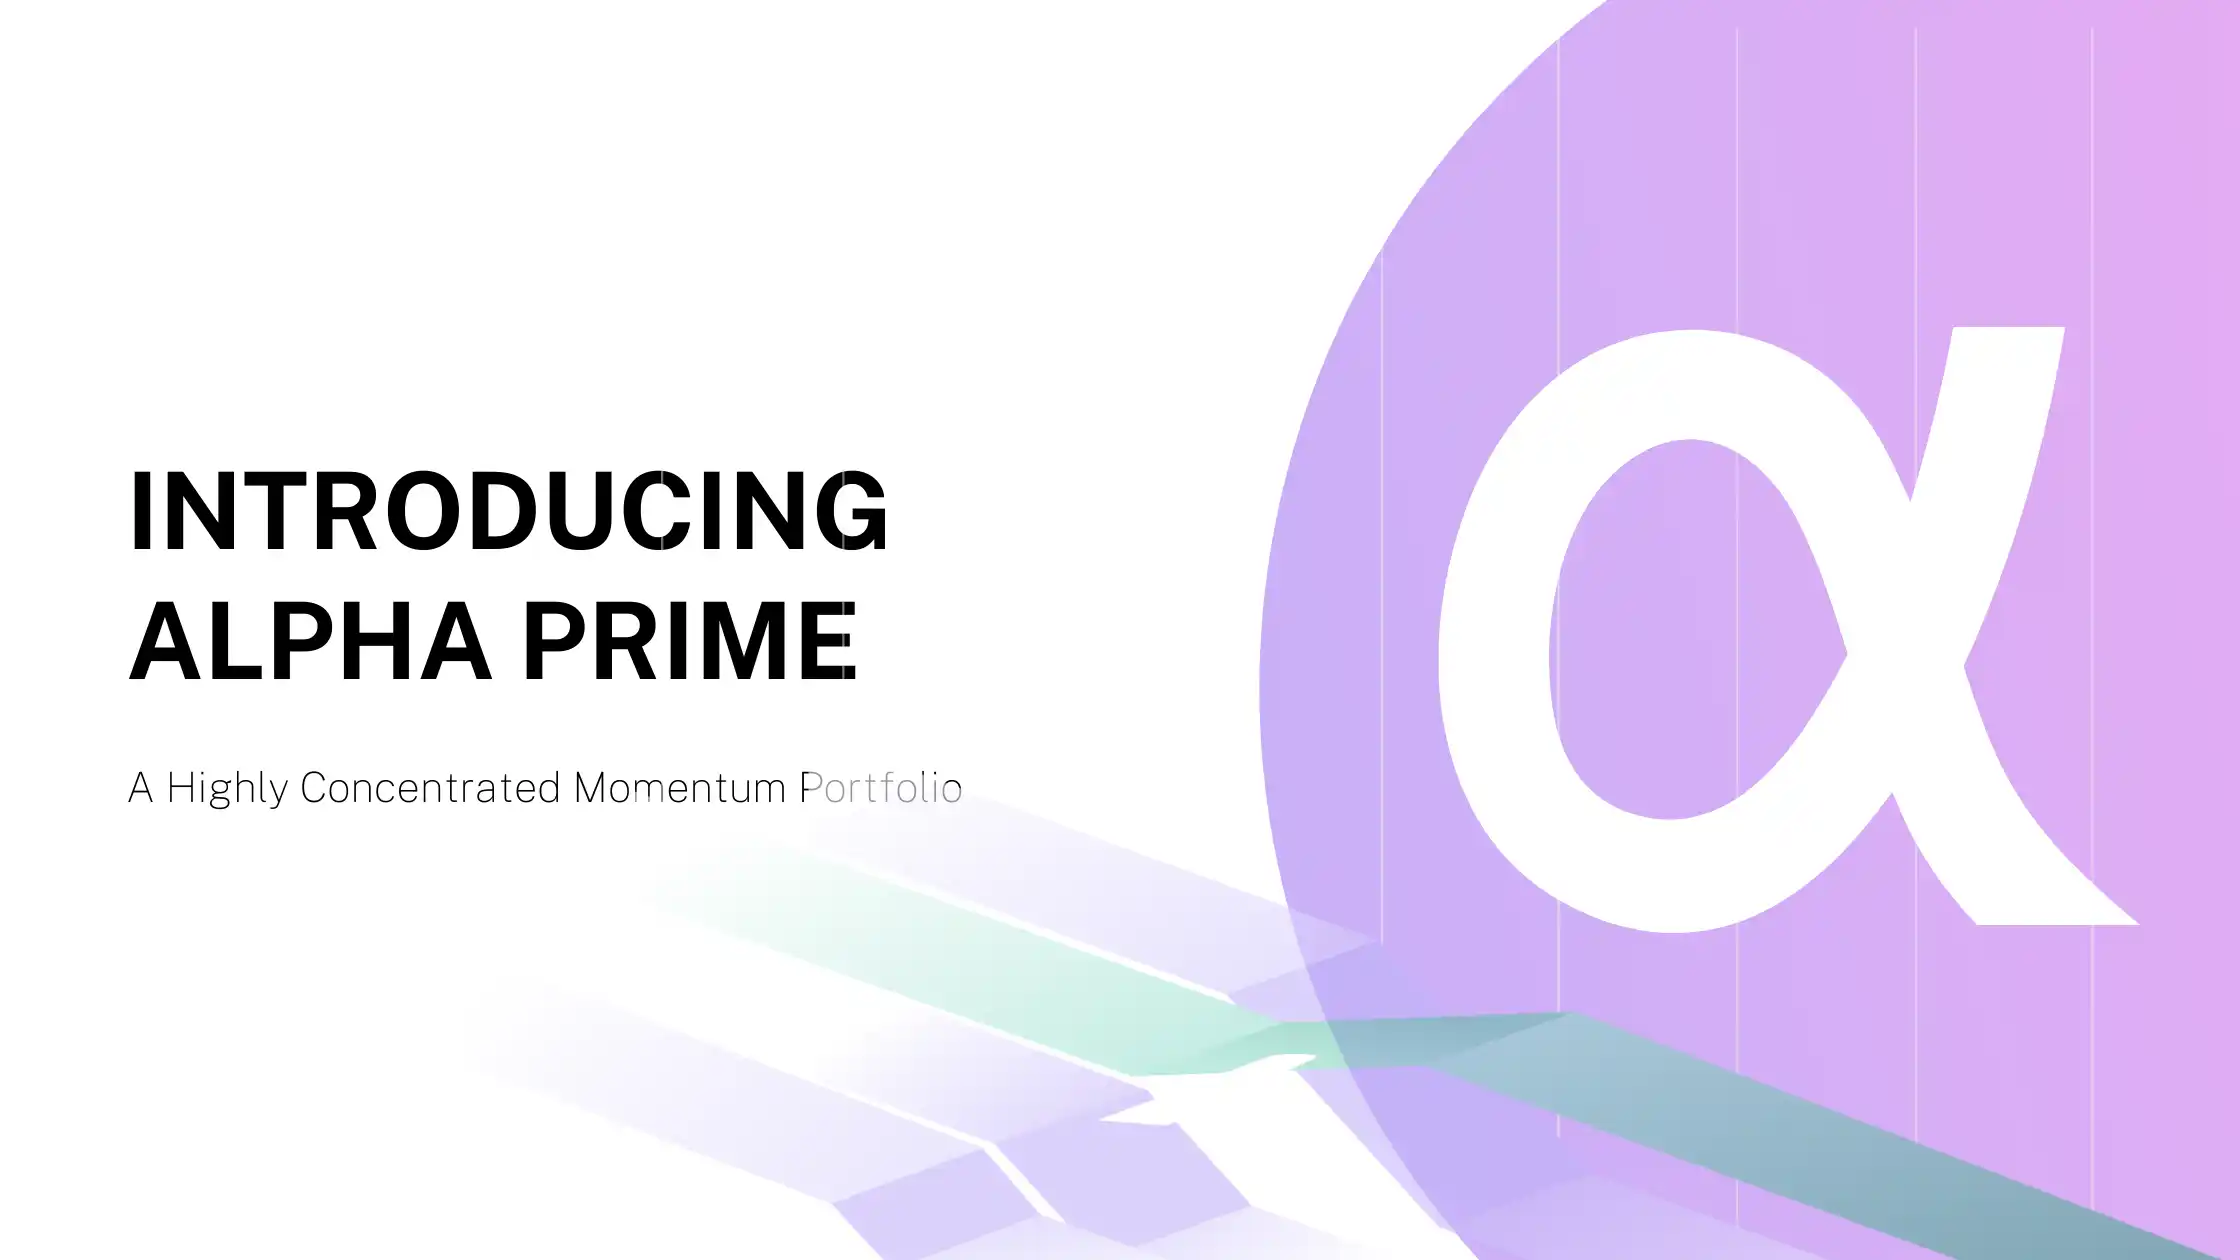 Alpha Prime: Unveiling Our New Concentrated Momentum, High-Risk Investment Portfolio